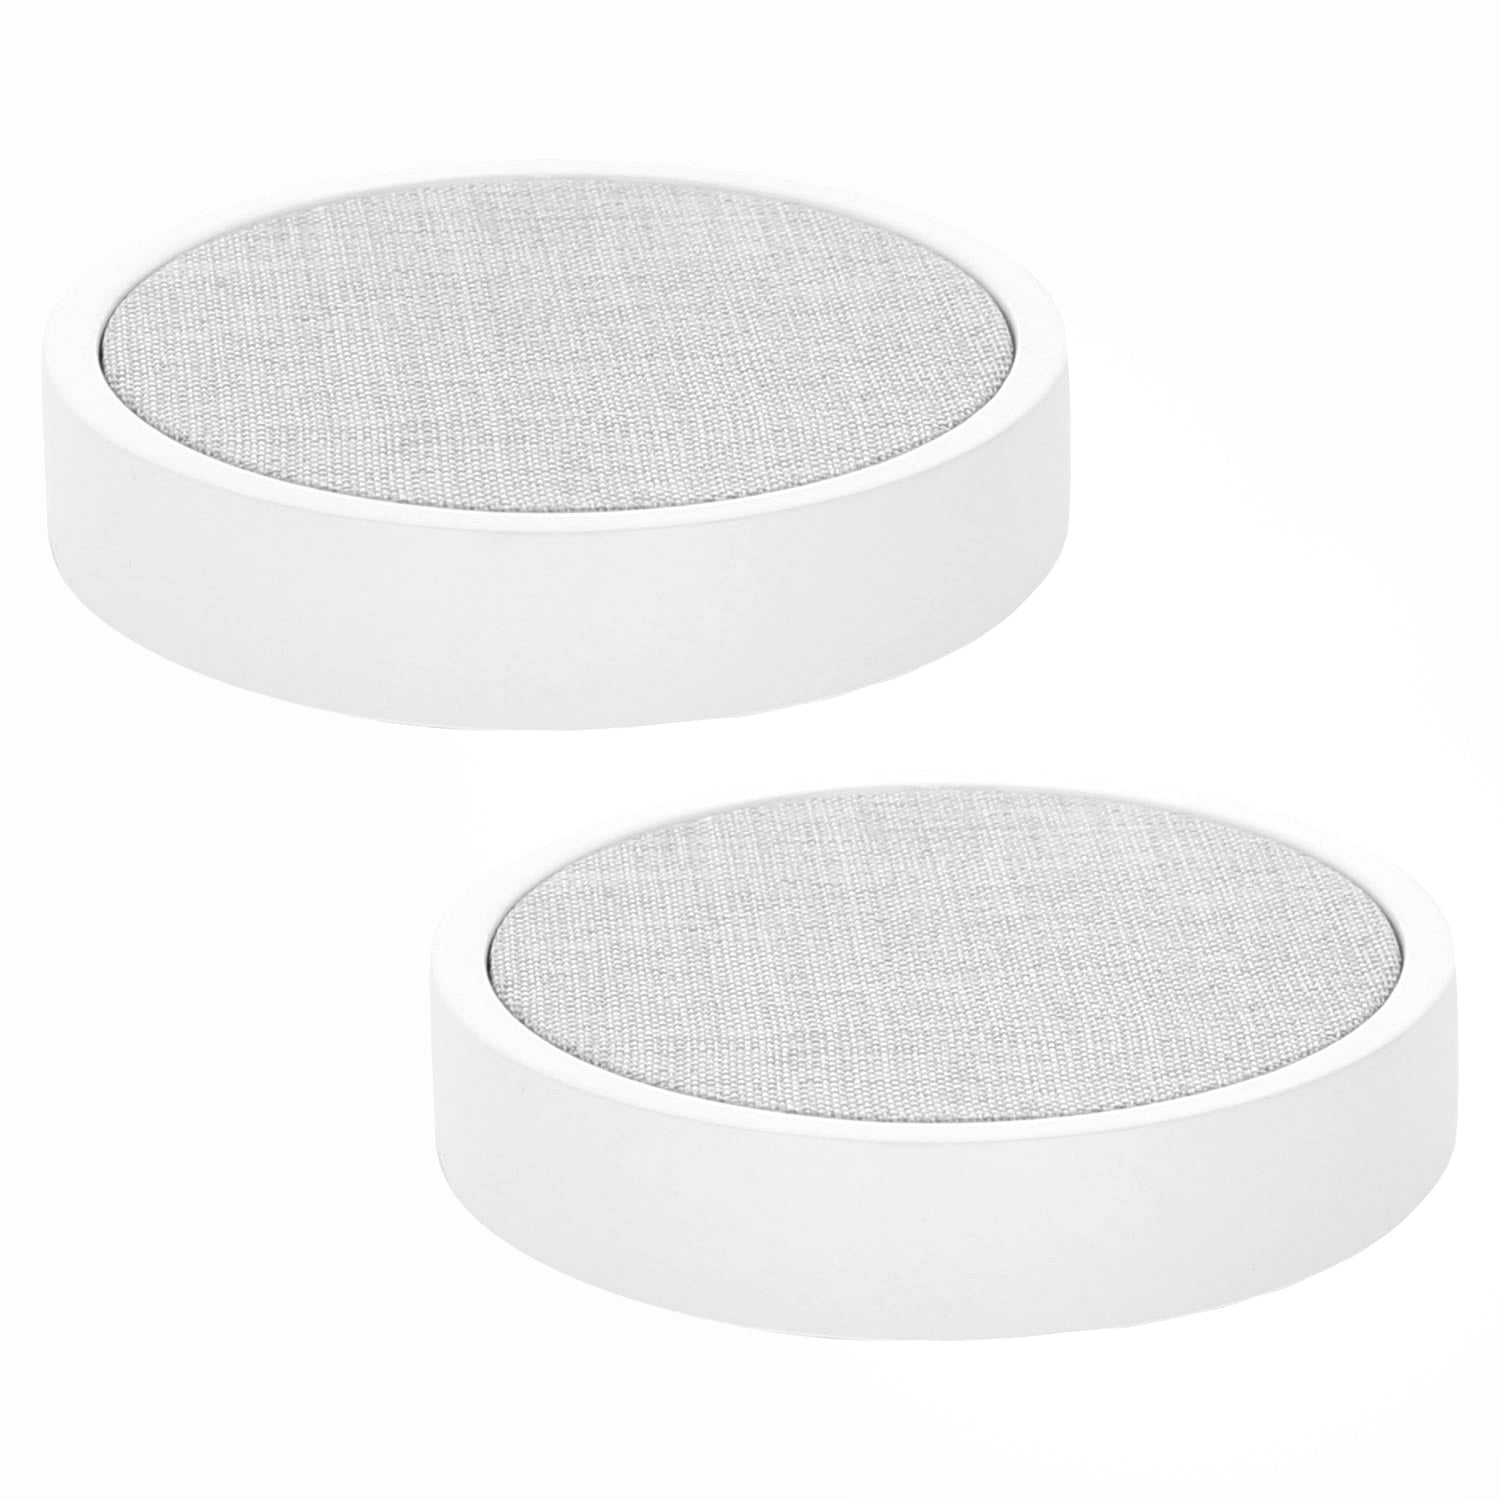 Round Jewelry Display Gray Linen and White Mdf Base - Set of 2